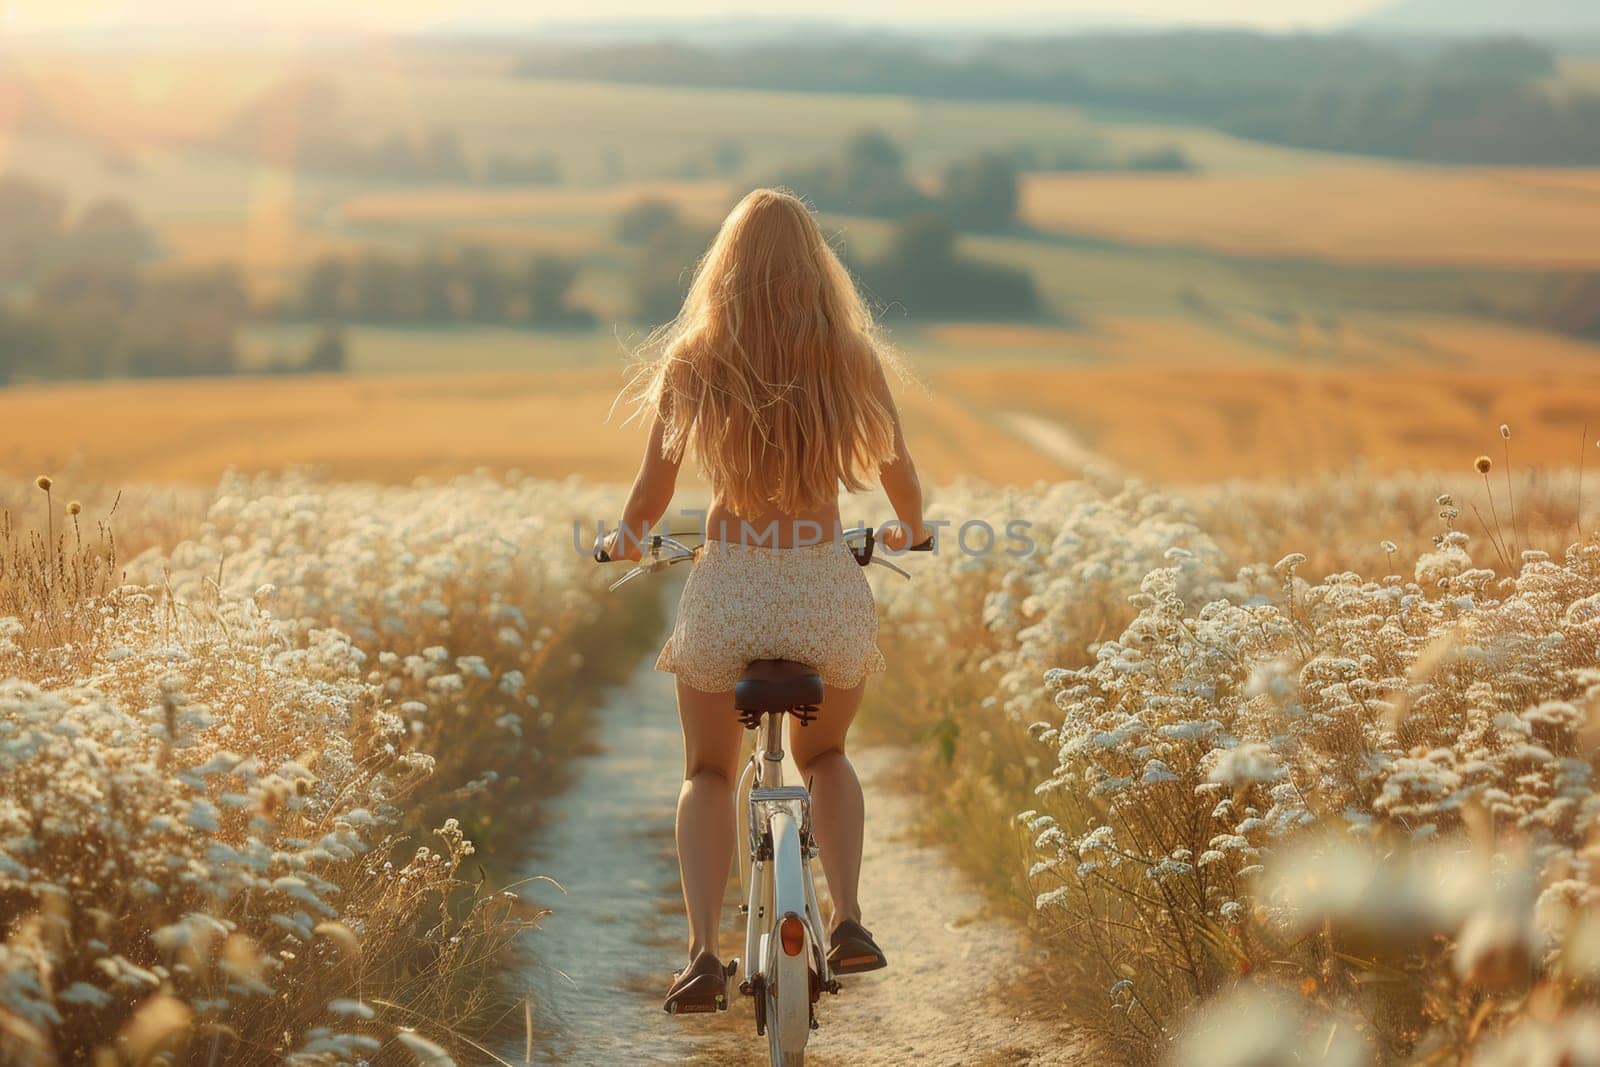 A young woman rides a bicycle on a field road in summer.